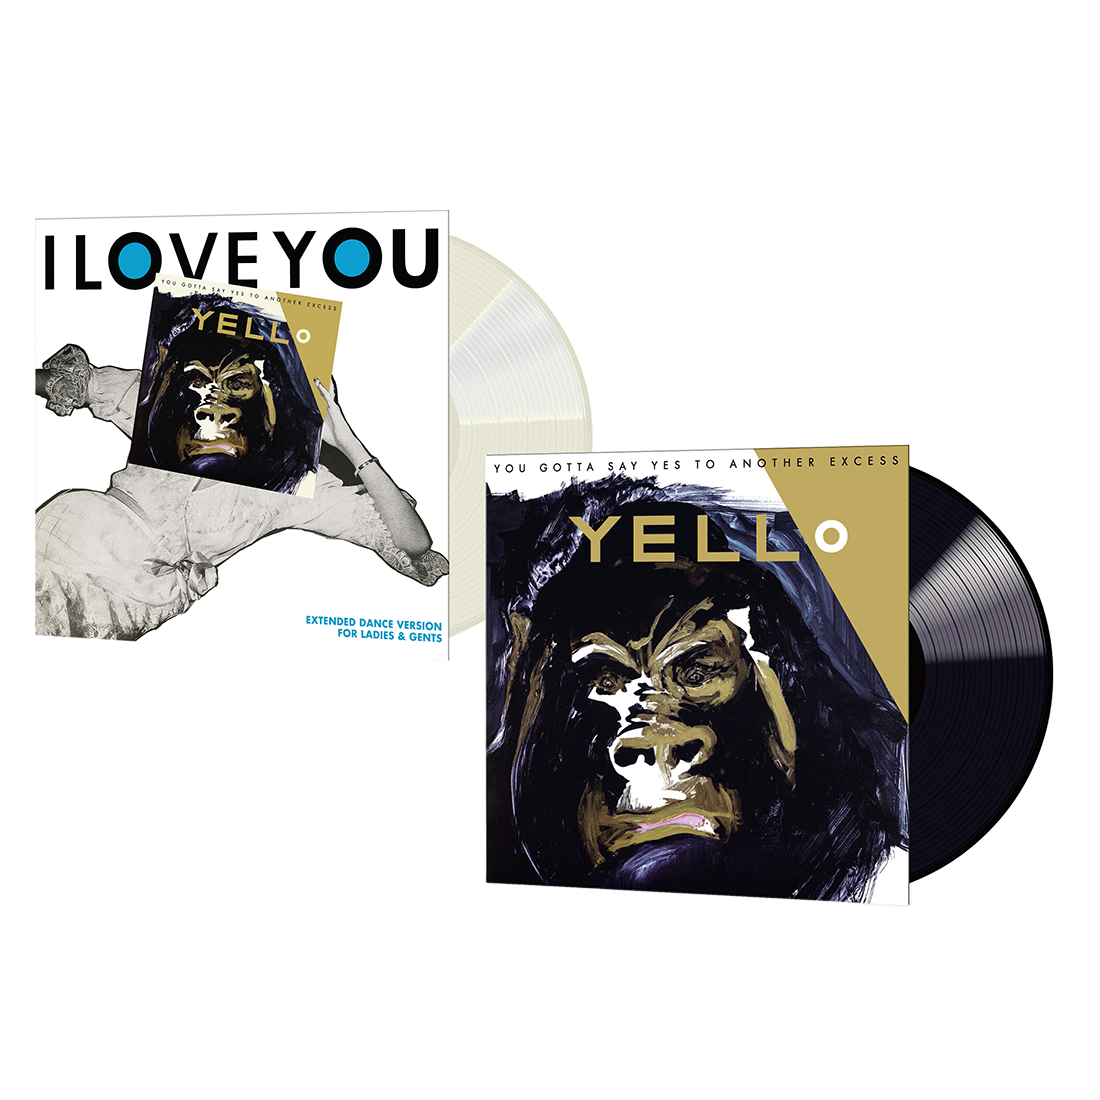 Yello - You Gotta Say Yes To Another Access: Limited Black + Grey Vinyl 2LP